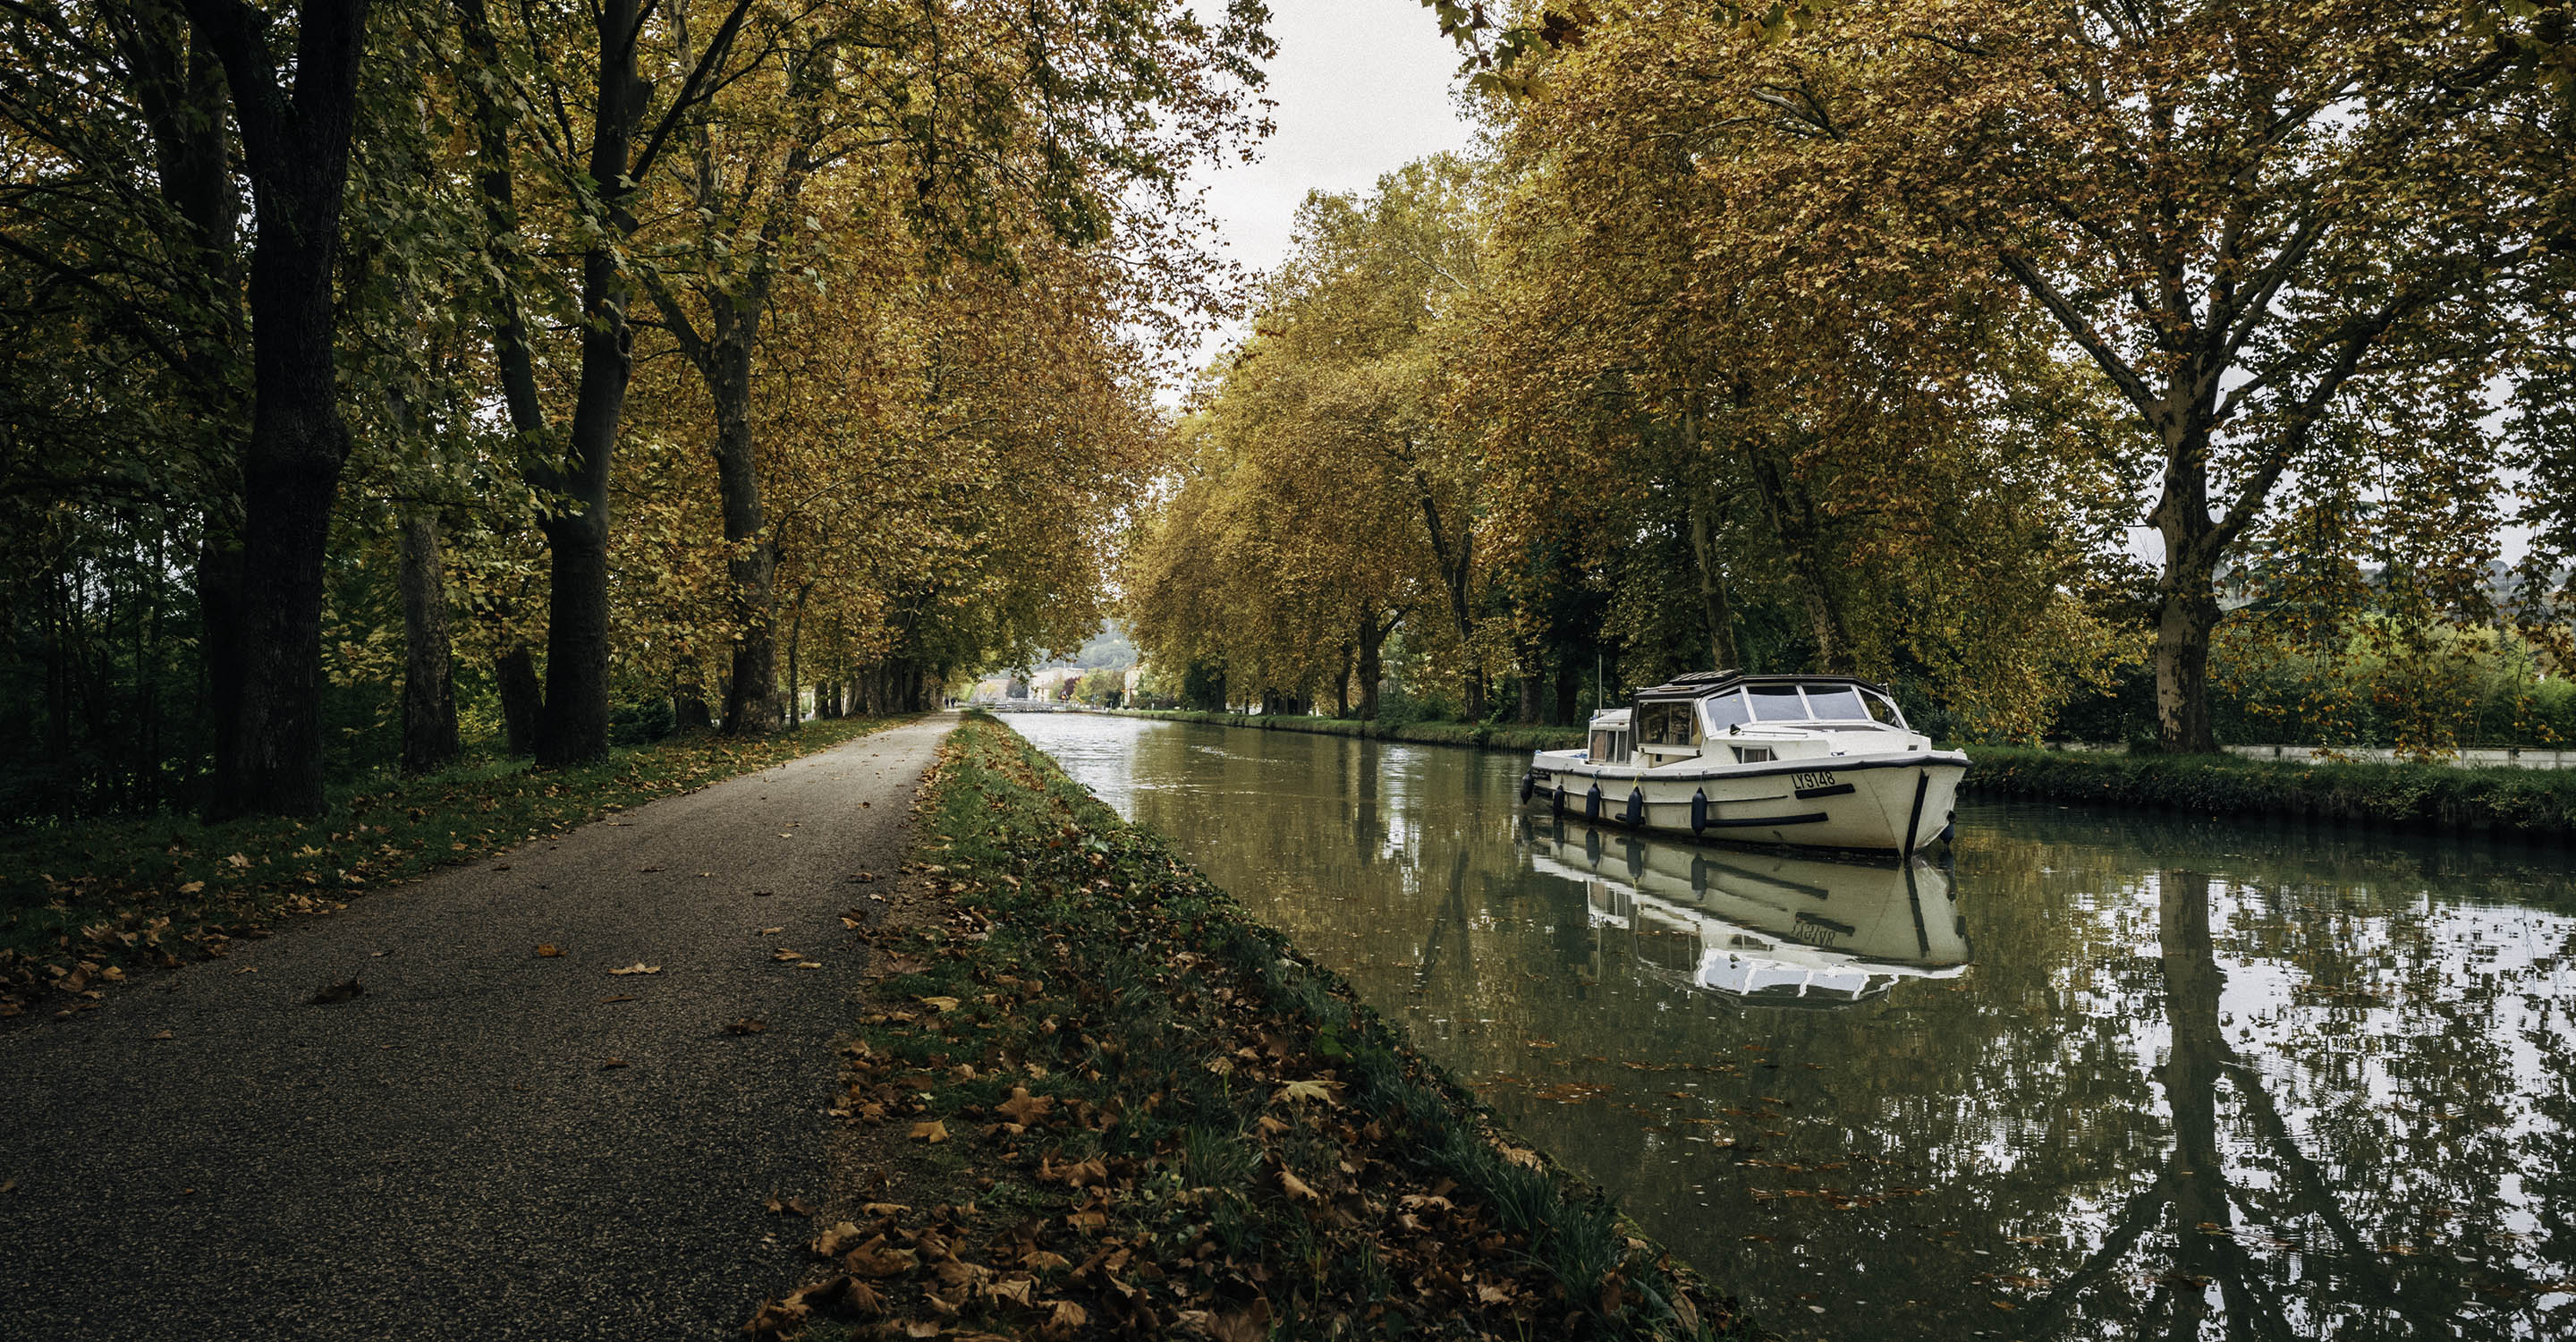 autumn scene of boat on the canal